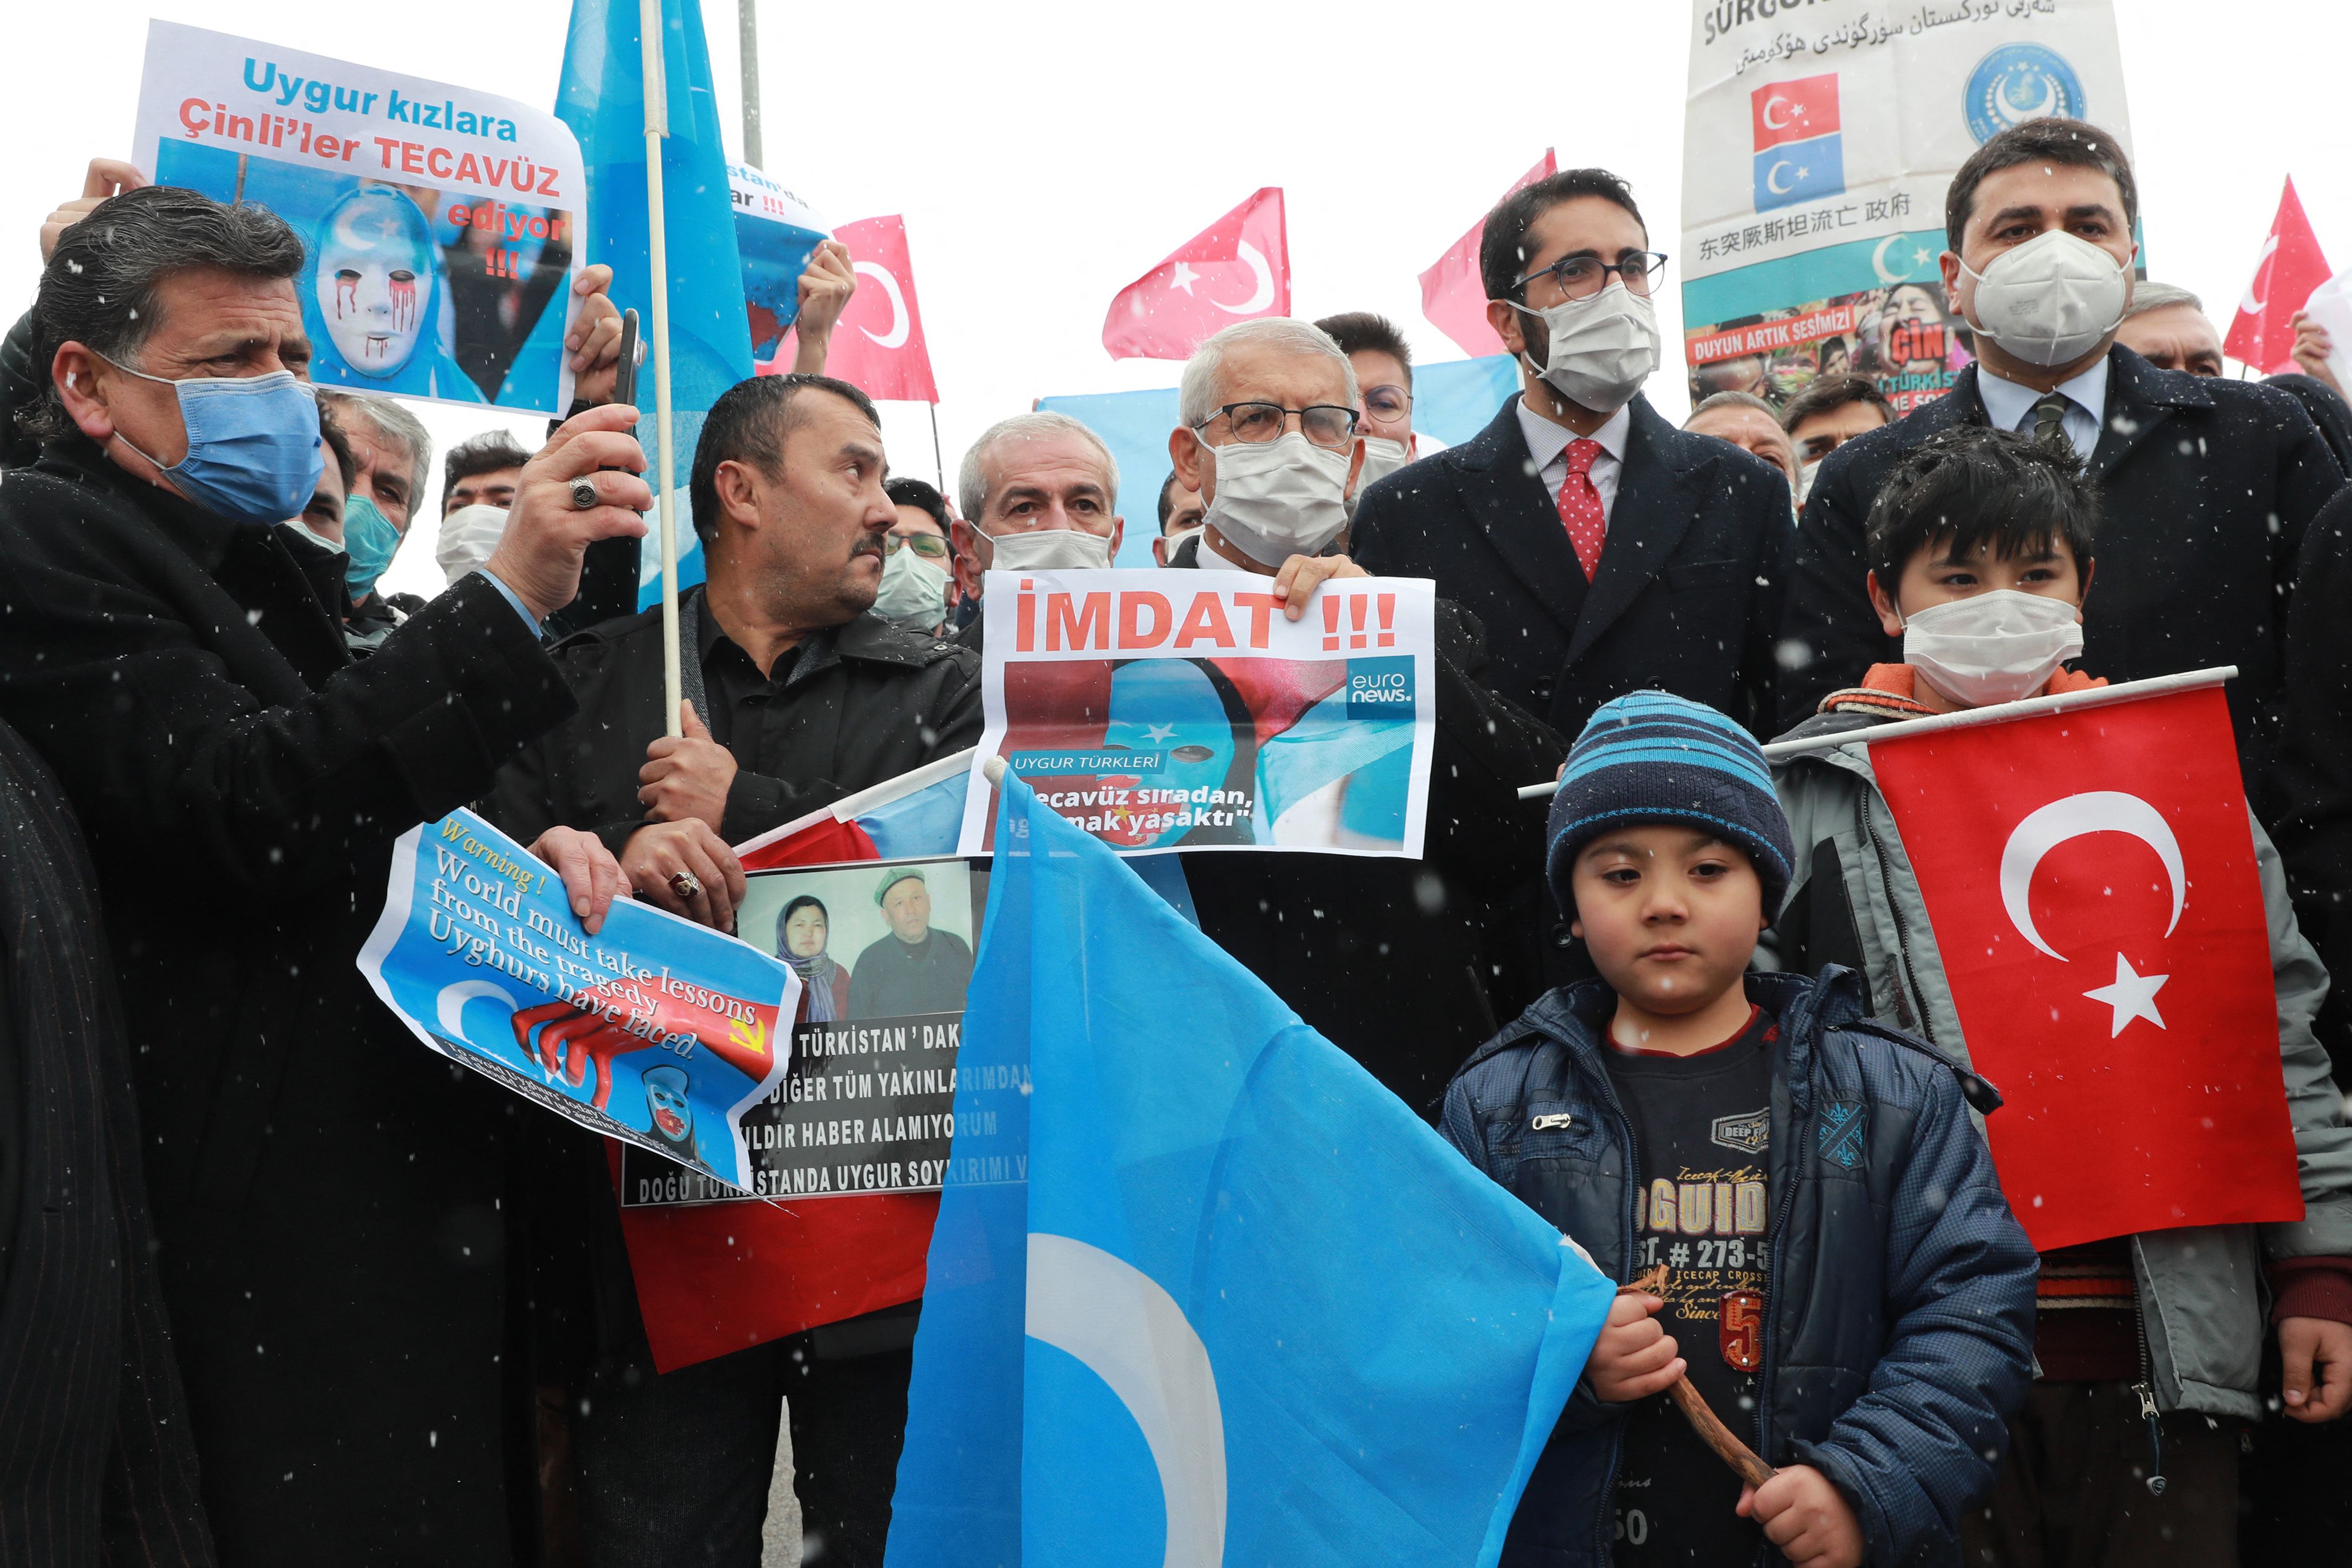 Protestors in front of the Chinese embassy in Ankara, on March 25, 2021